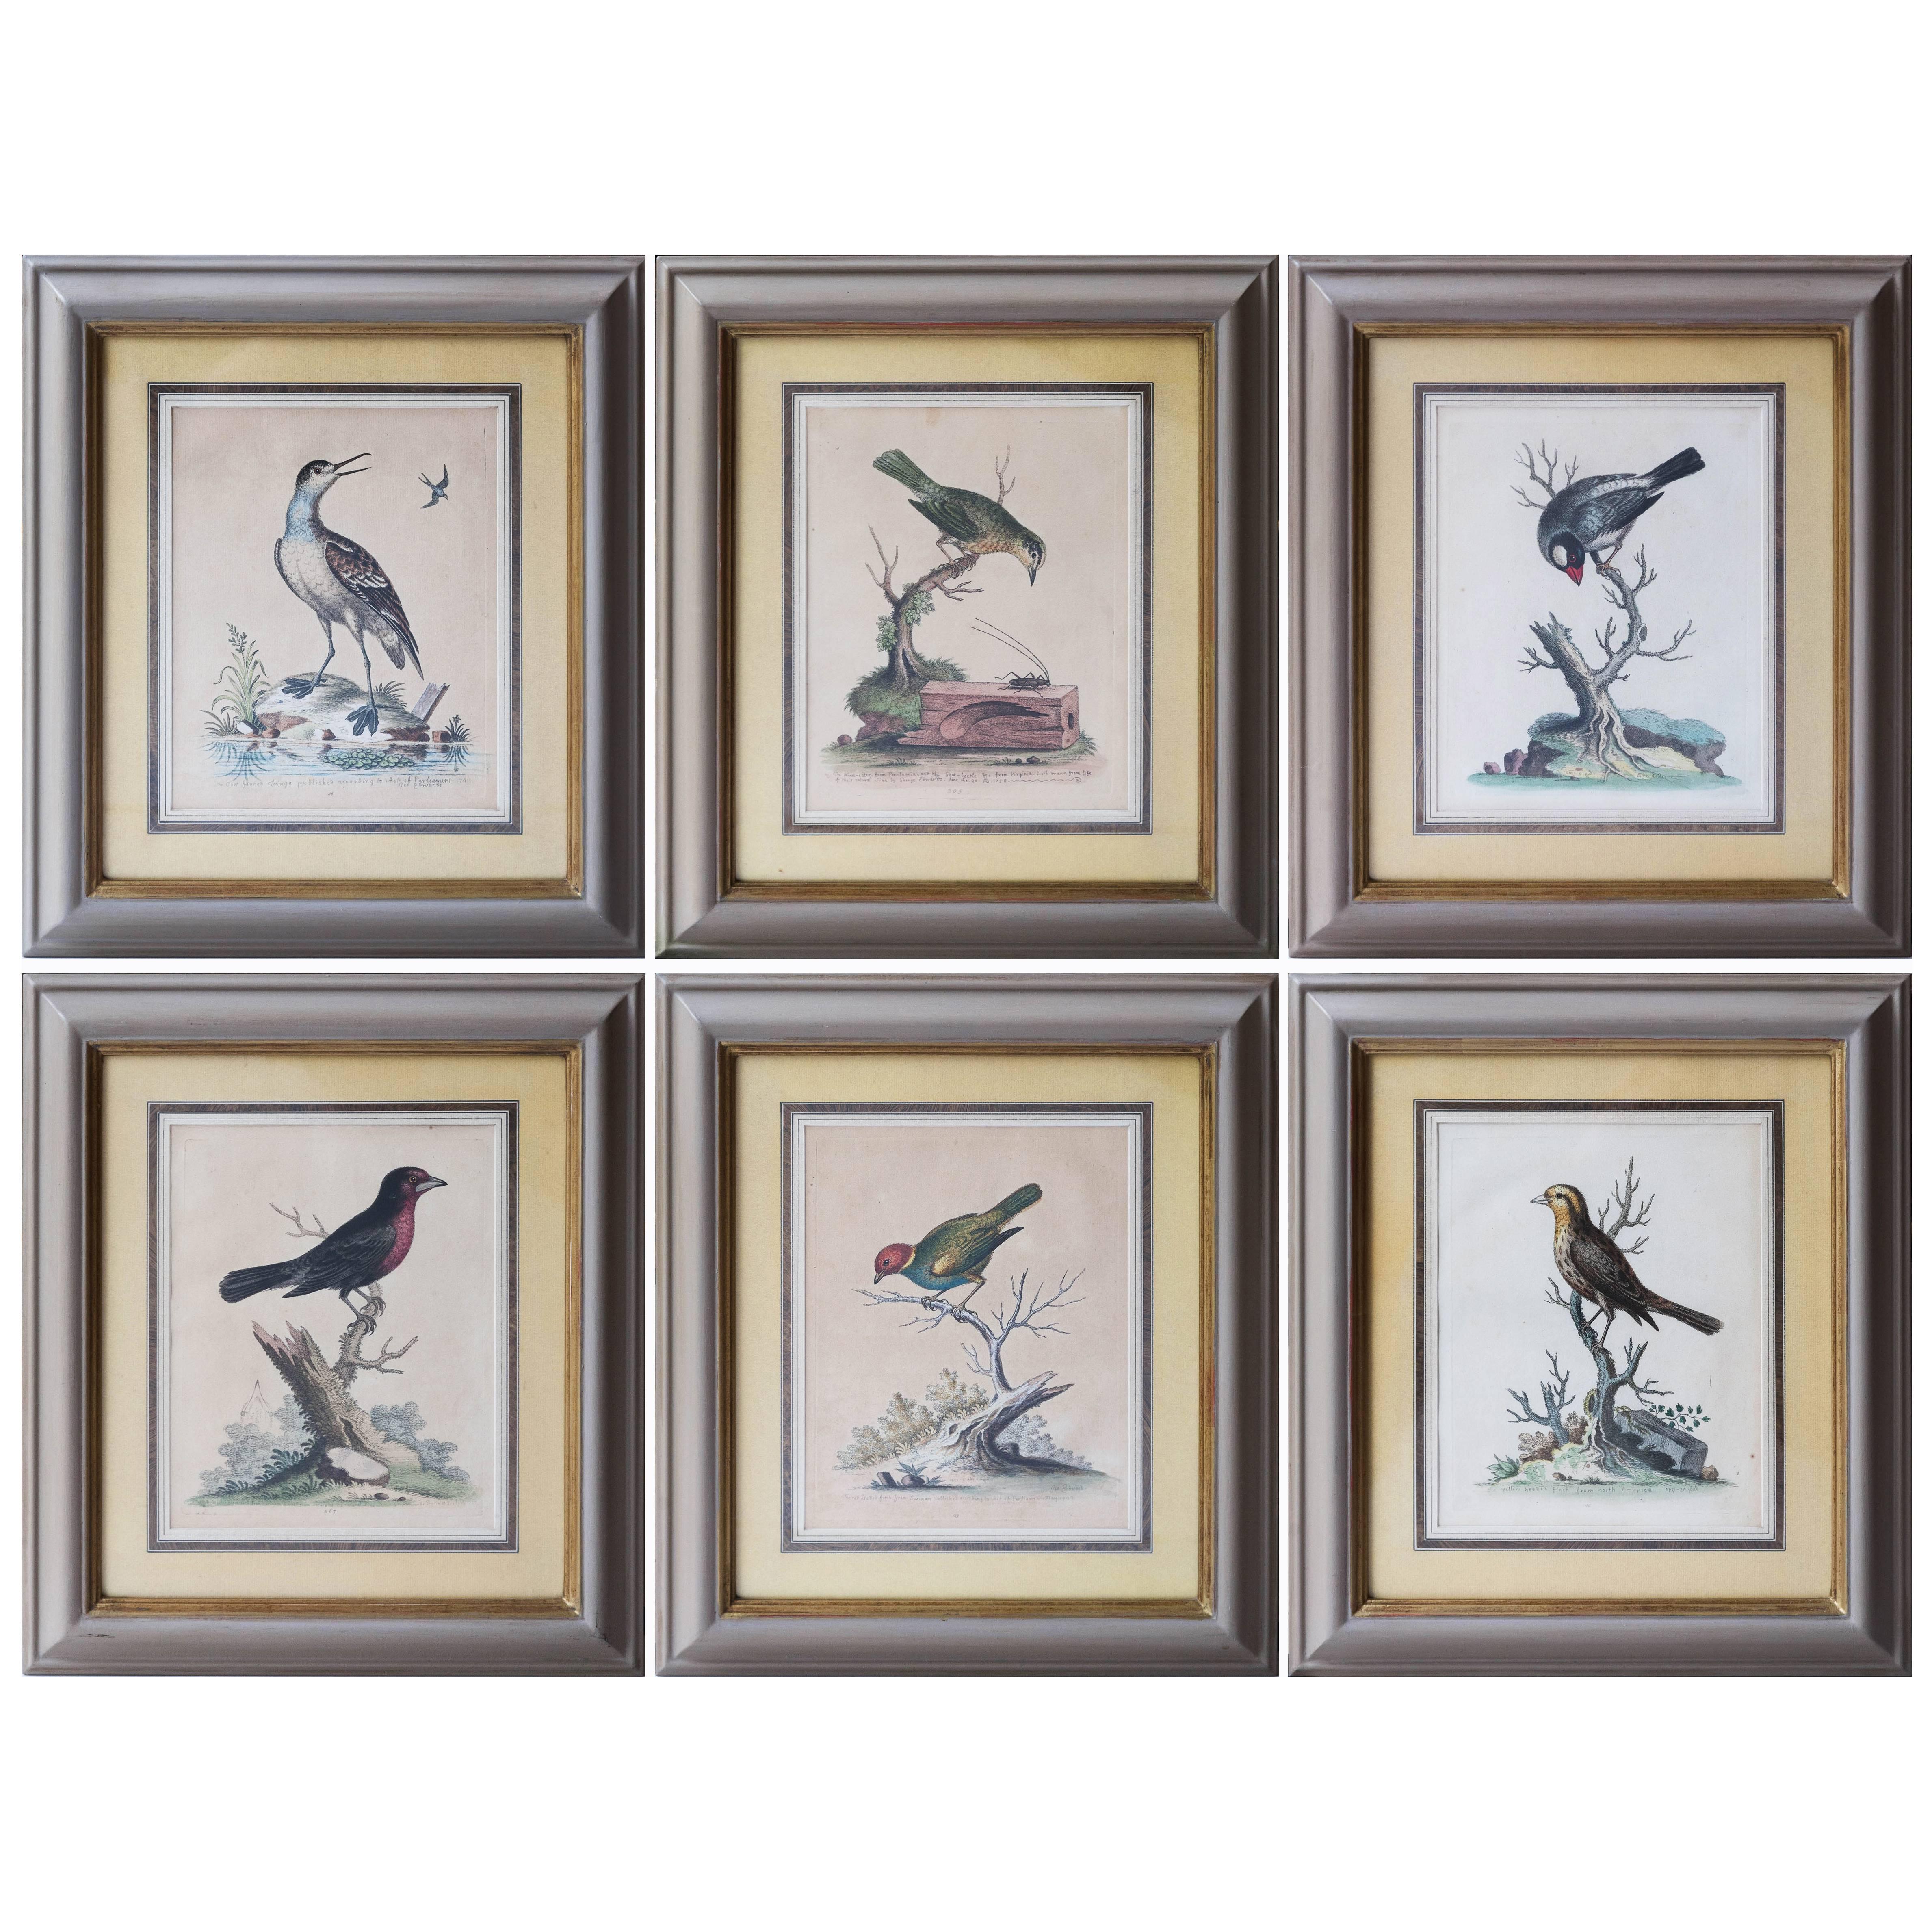 Six Framed English 18th Century Bird Prints After George Edwards, Published 1740